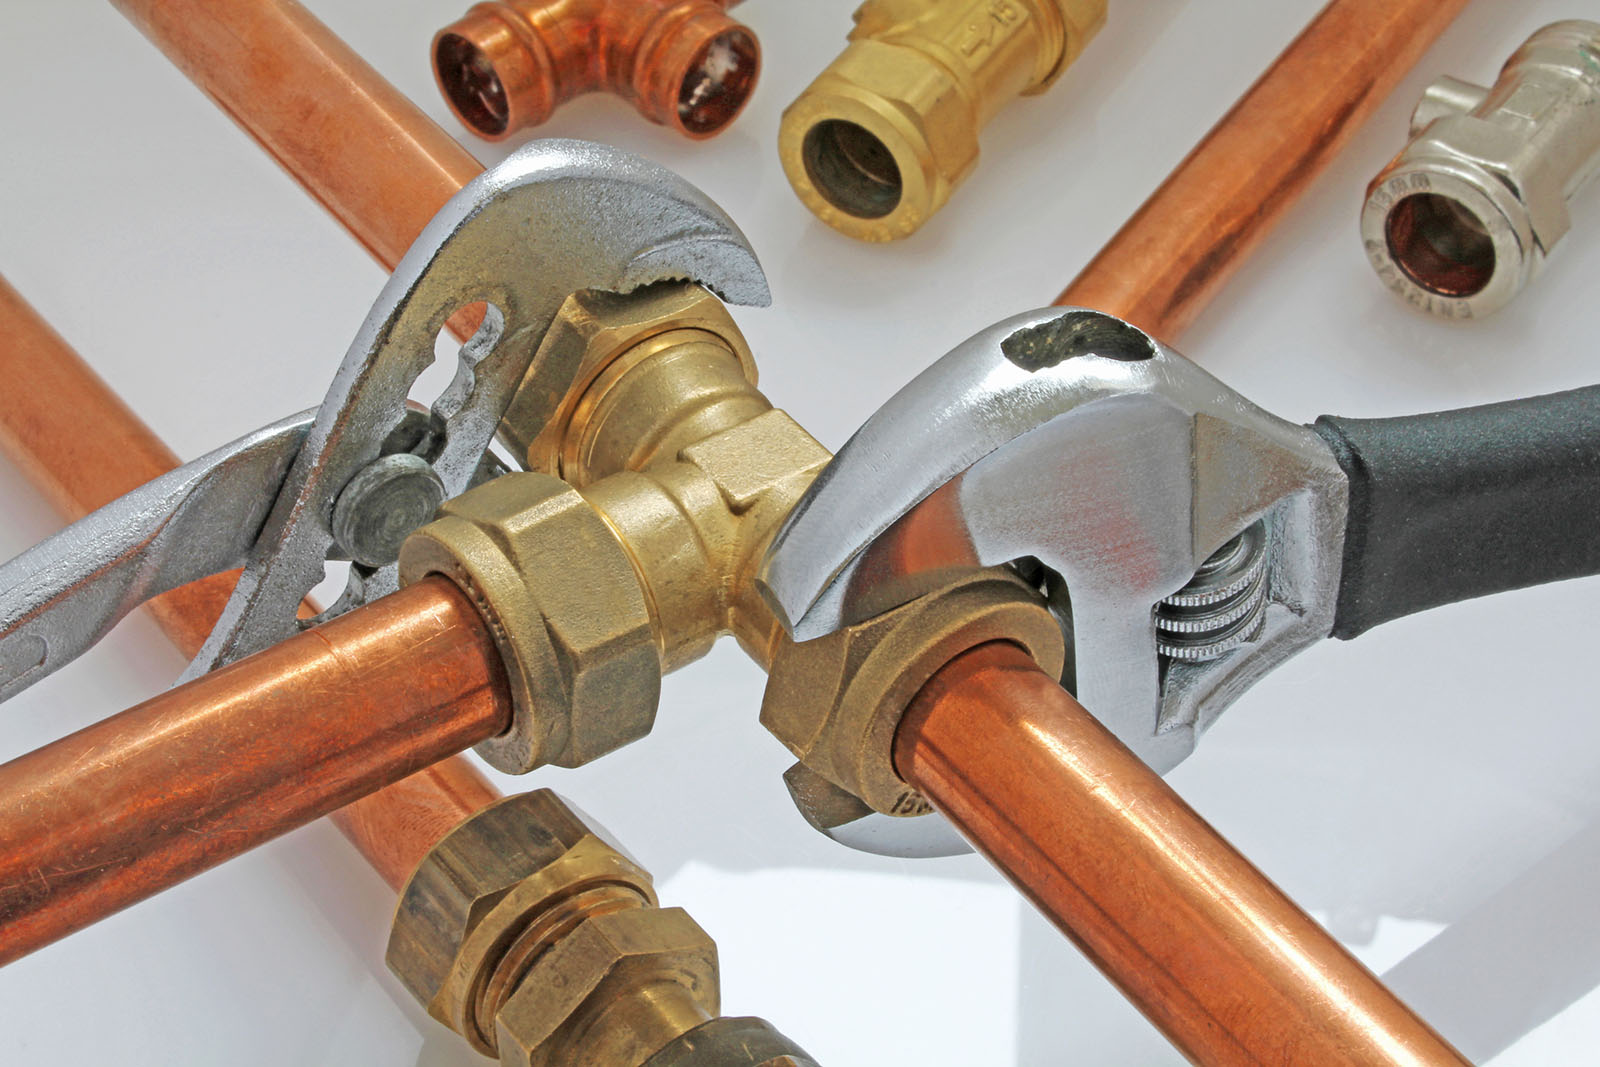 Adjustable wrenches tightening up copper pipe fittings